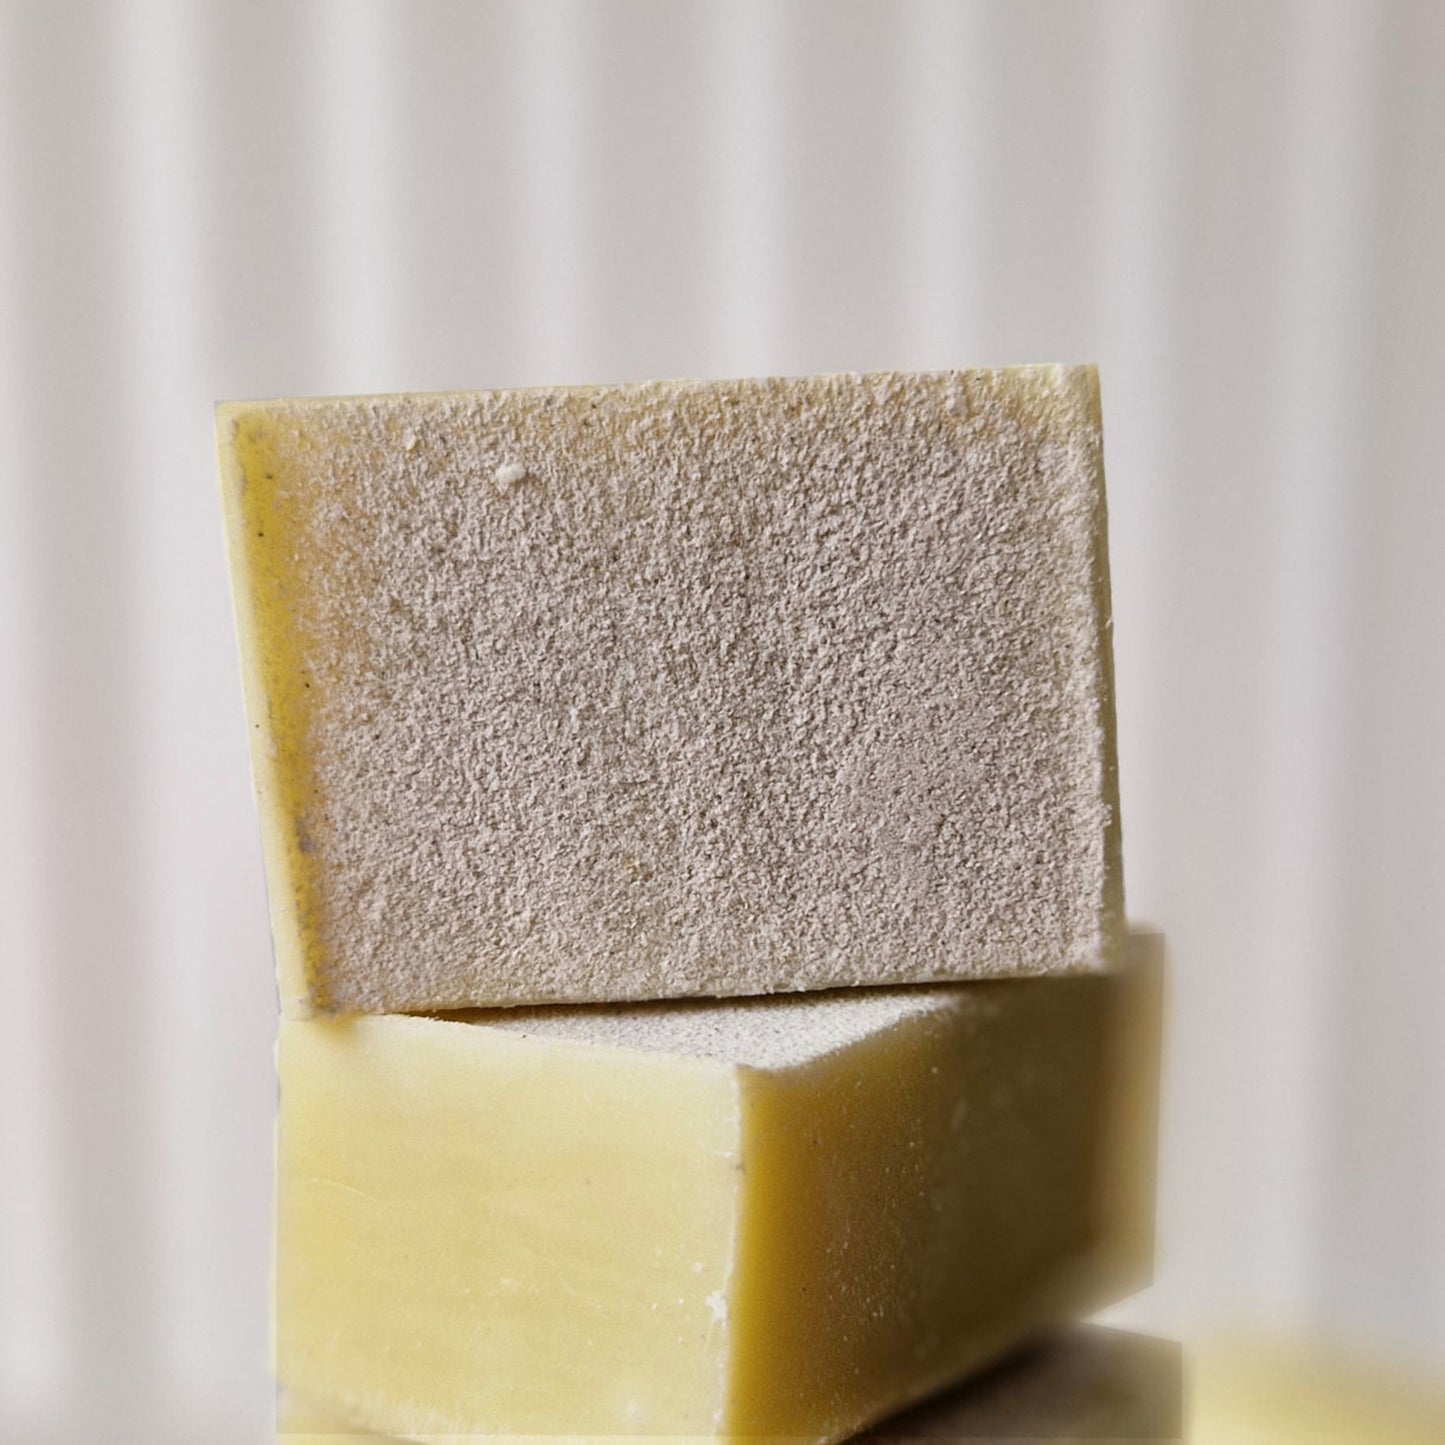 Foot soap with crushed pumice stone